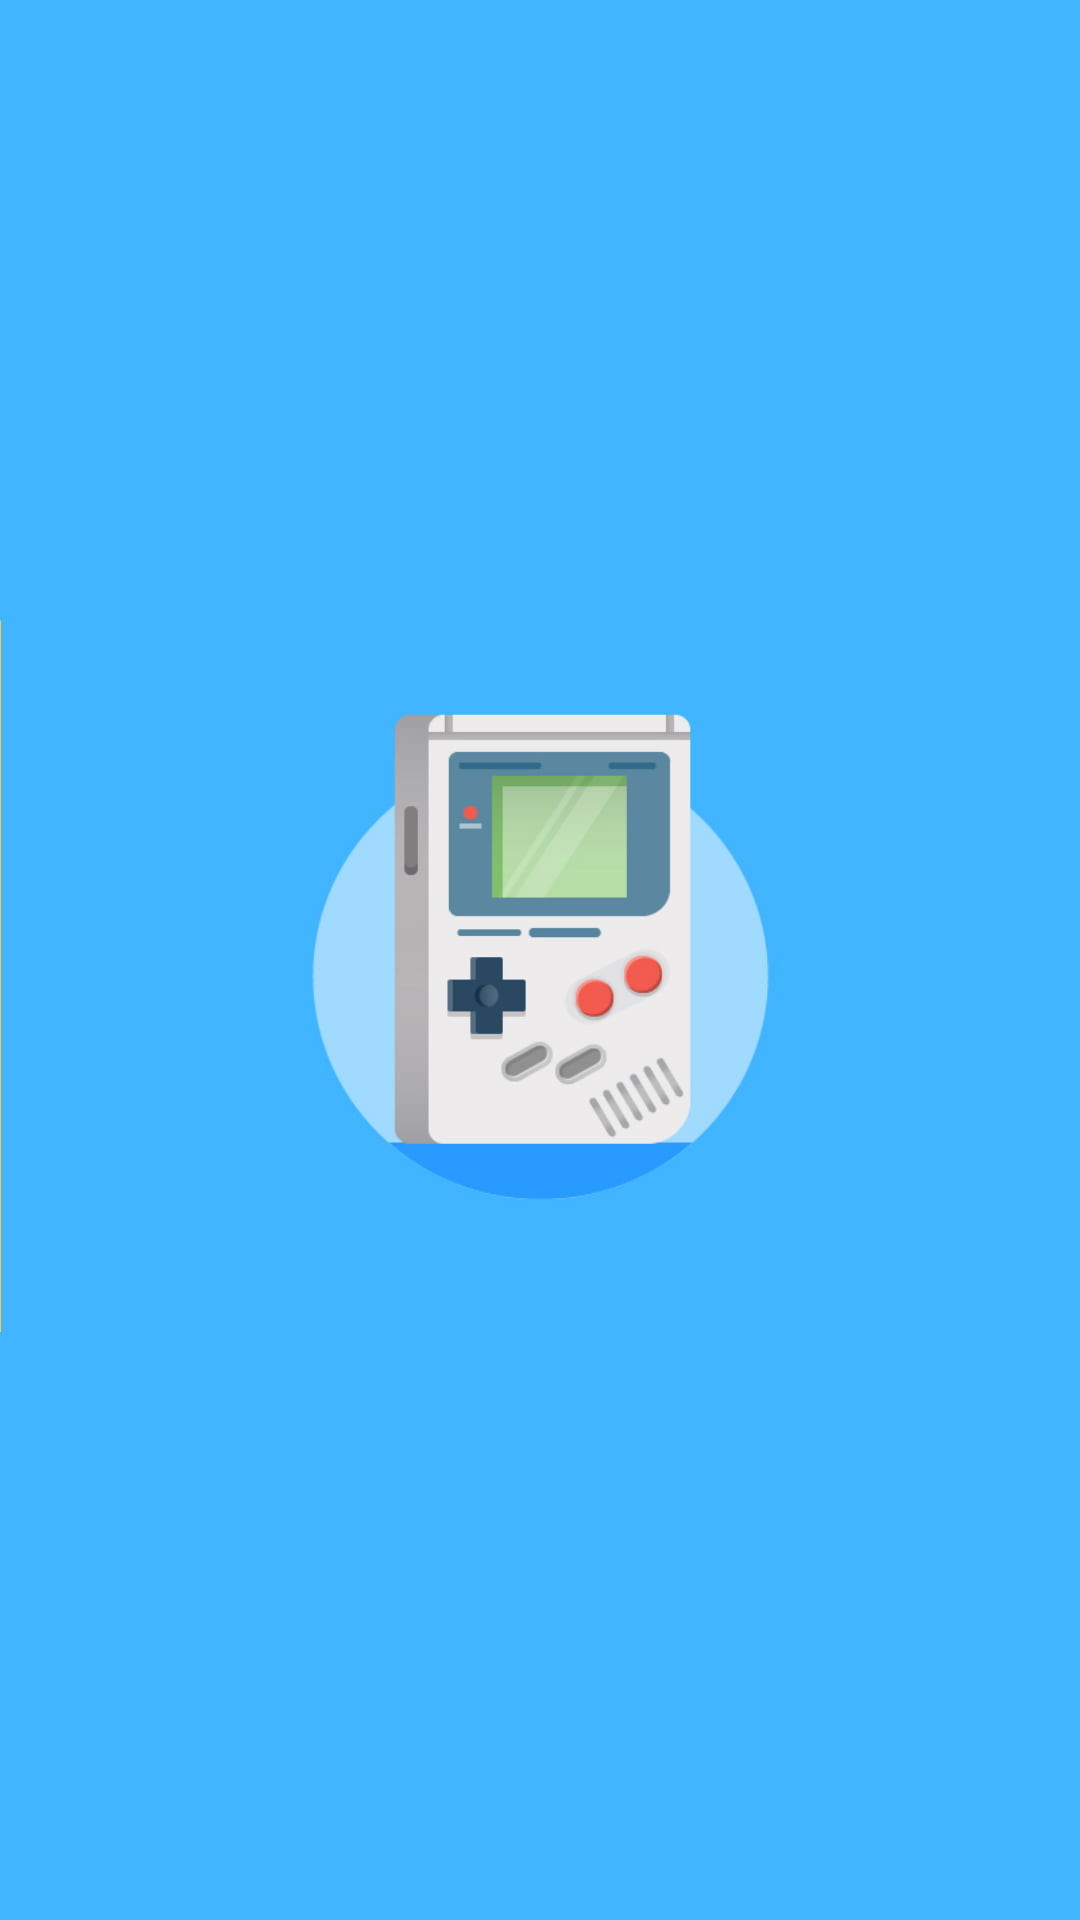 1080x1920 grey and white handheld console illustration, GameBoy HD wallpaper